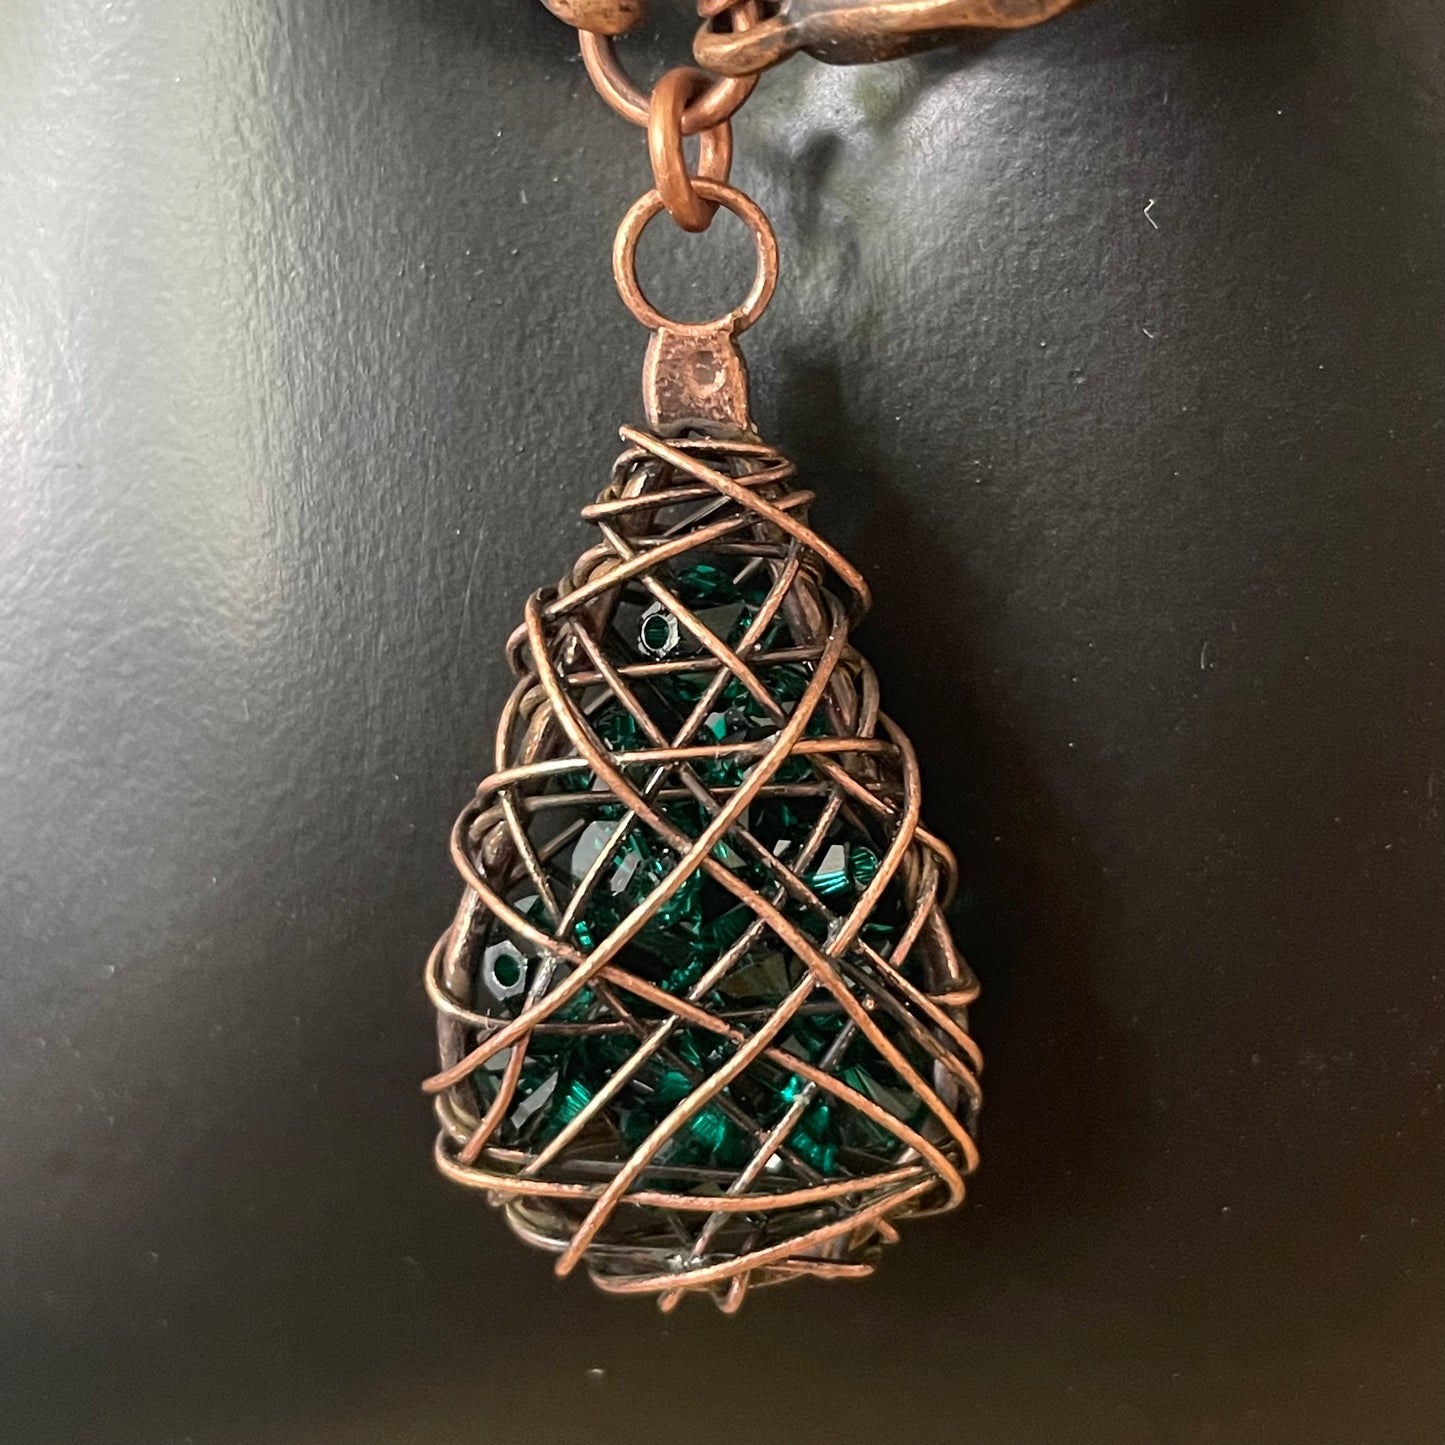 Dark Green Swarovski Crystal & Copper Wire Wrapped Pendant Necklace 22.25" Flowers Floral Textured